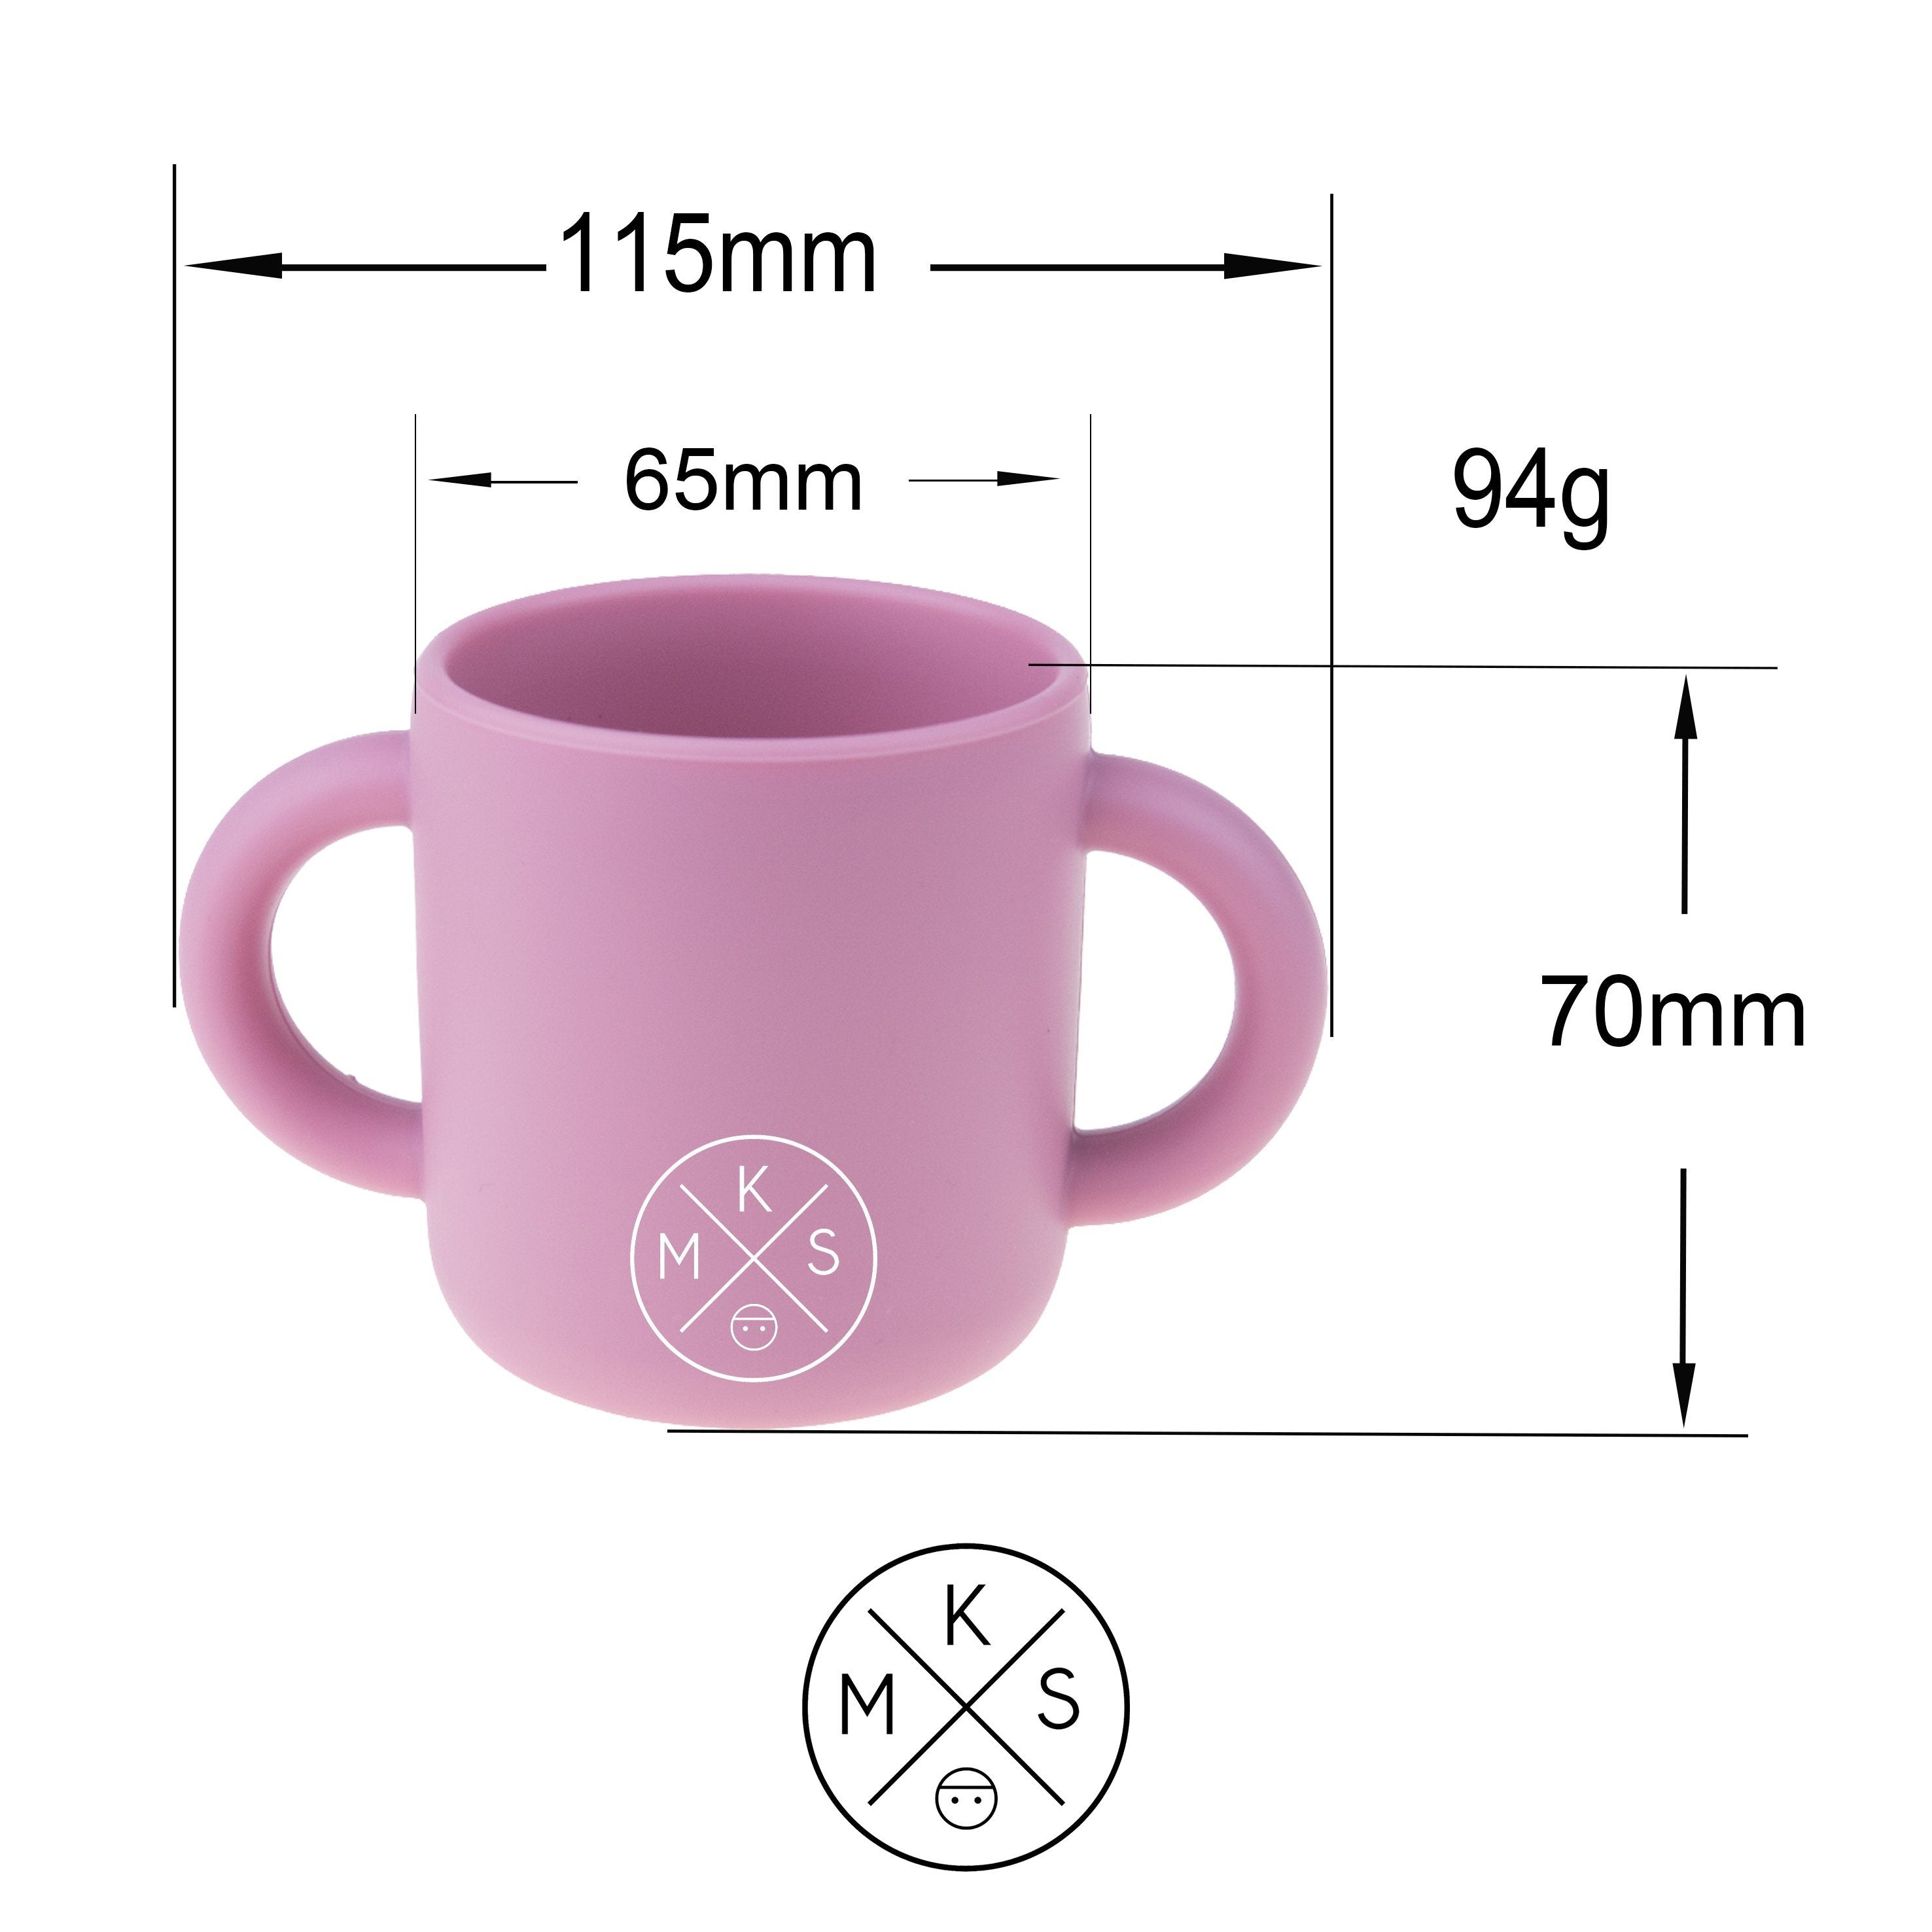 Mini & Maxi Silicone drinking cup with straw Toddler kids MKS Miminoo